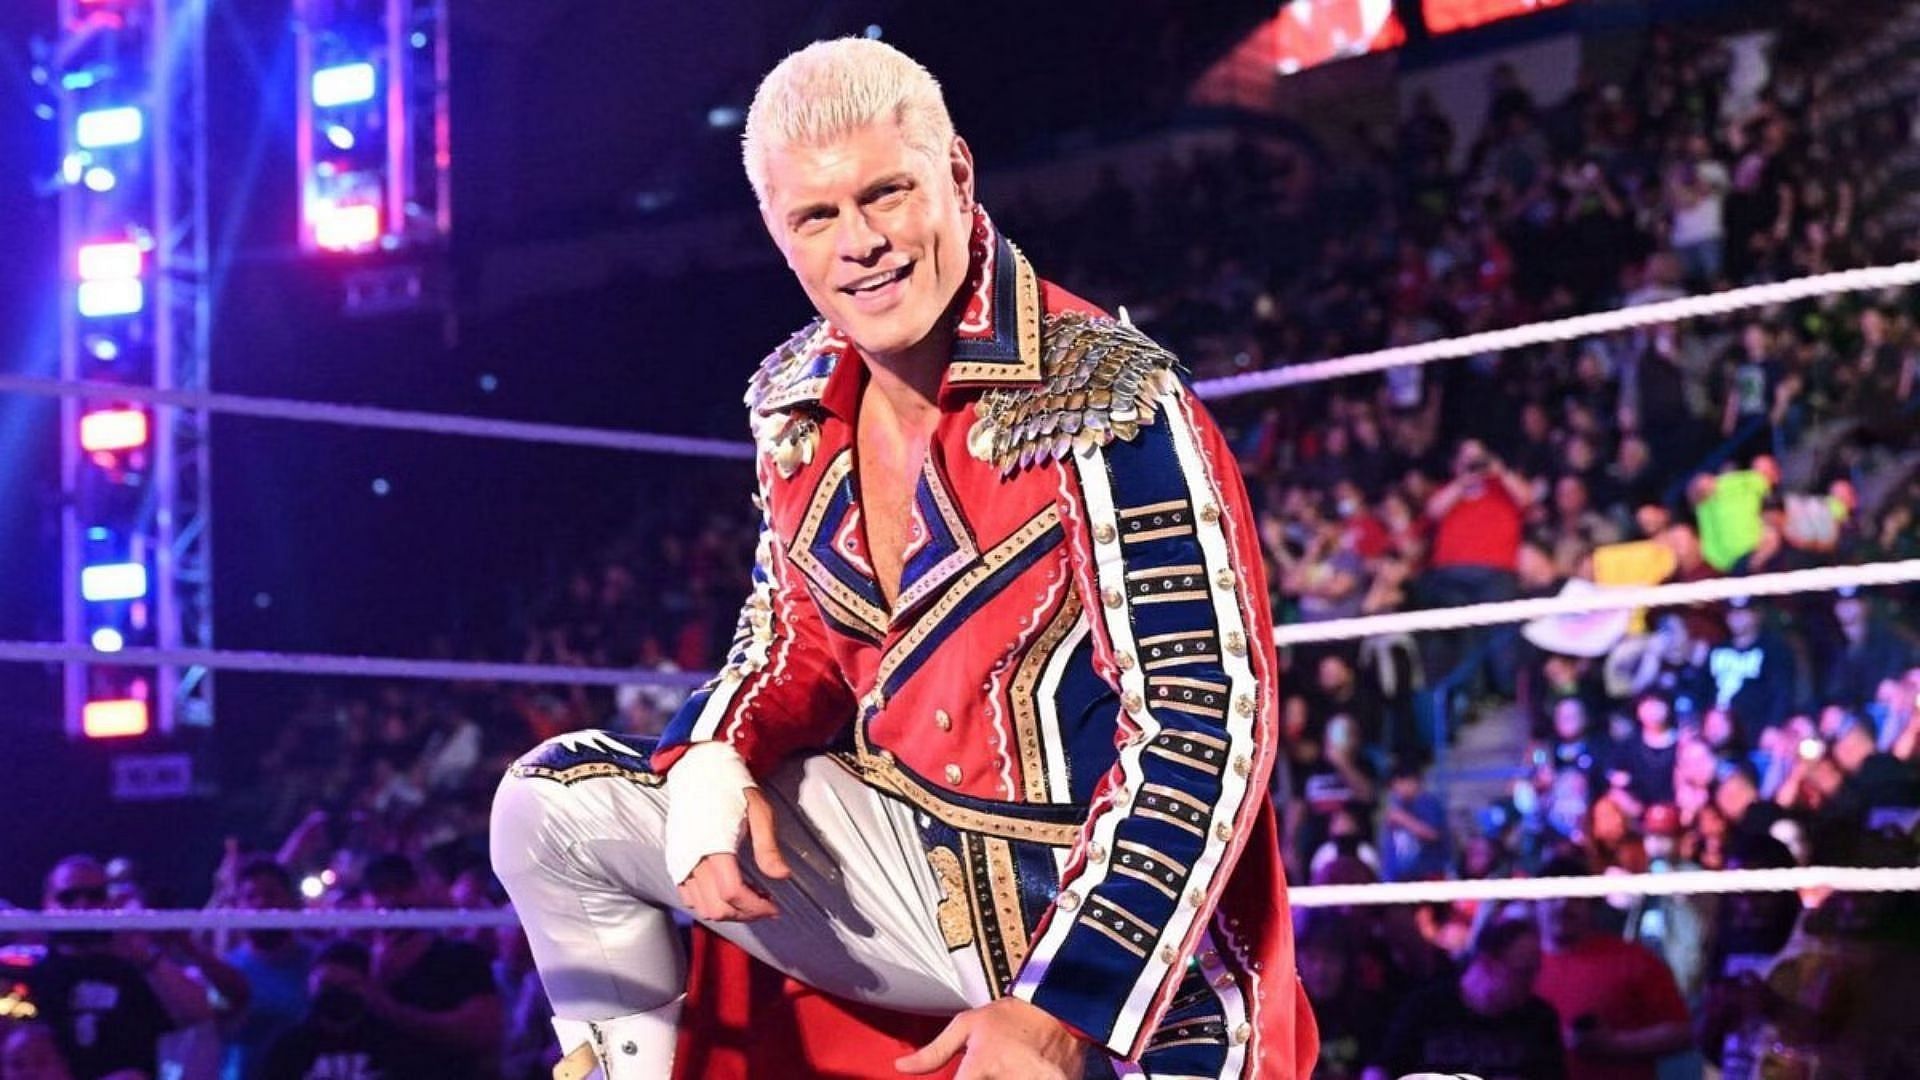 Cody Rhodes won the 2023 Royal Rumble match this past weekend